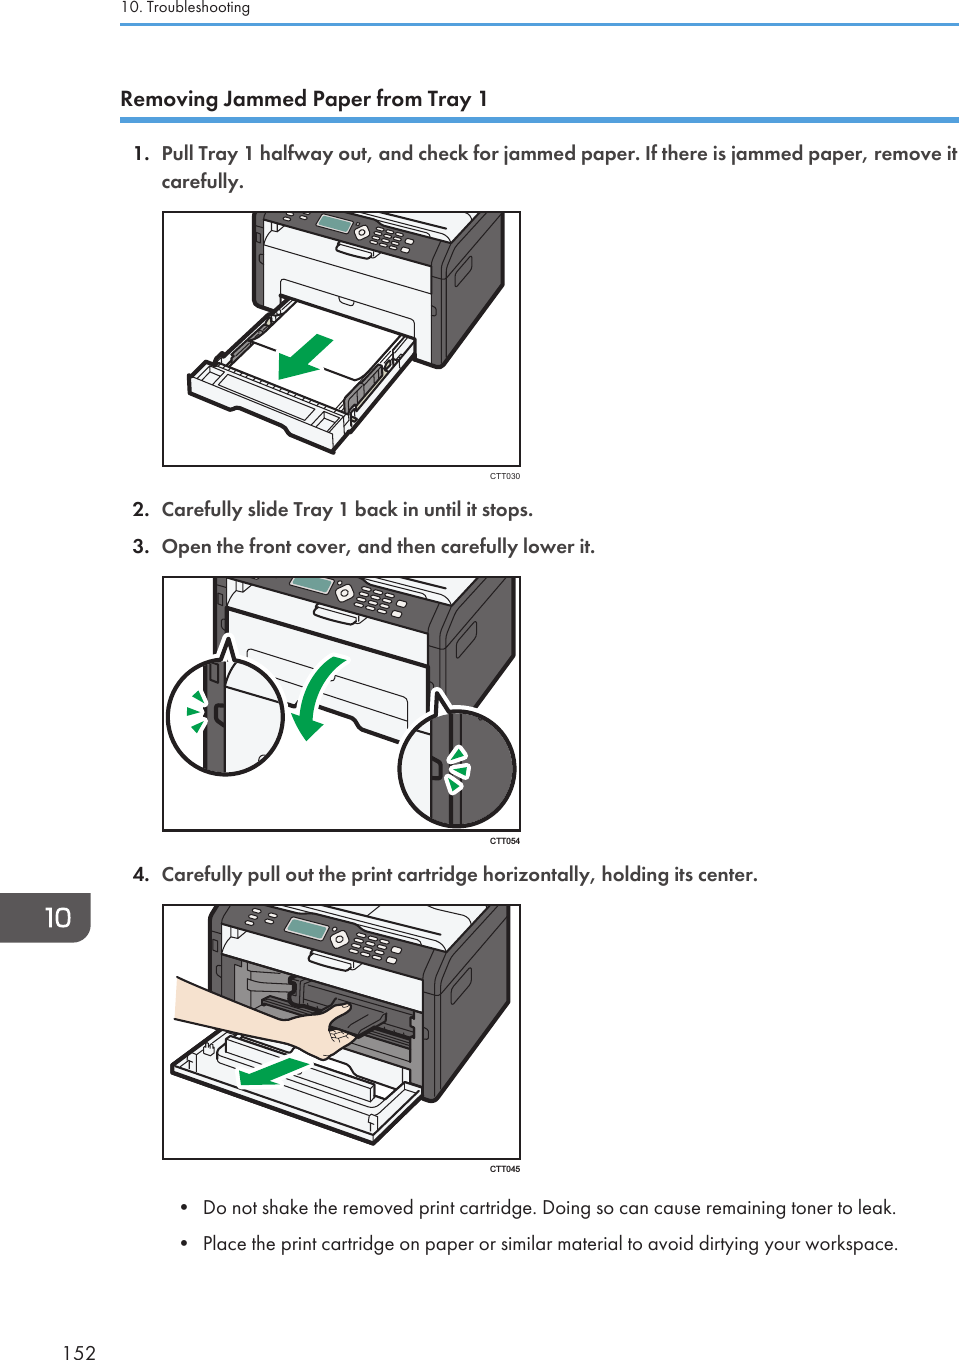 Removing Jammed Paper from Tray 11. Pull Tray 1 halfway out, and check for jammed paper. If there is jammed paper, remove itcarefully.CTT0302. Carefully slide Tray 1 back in until it stops.3. Open the front cover, and then carefully lower it.CTT0544. Carefully pull out the print cartridge horizontally, holding its center.CTT045• Do not shake the removed print cartridge. Doing so can cause remaining toner to leak.• Place the print cartridge on paper or similar material to avoid dirtying your workspace.10. Troubleshooting152